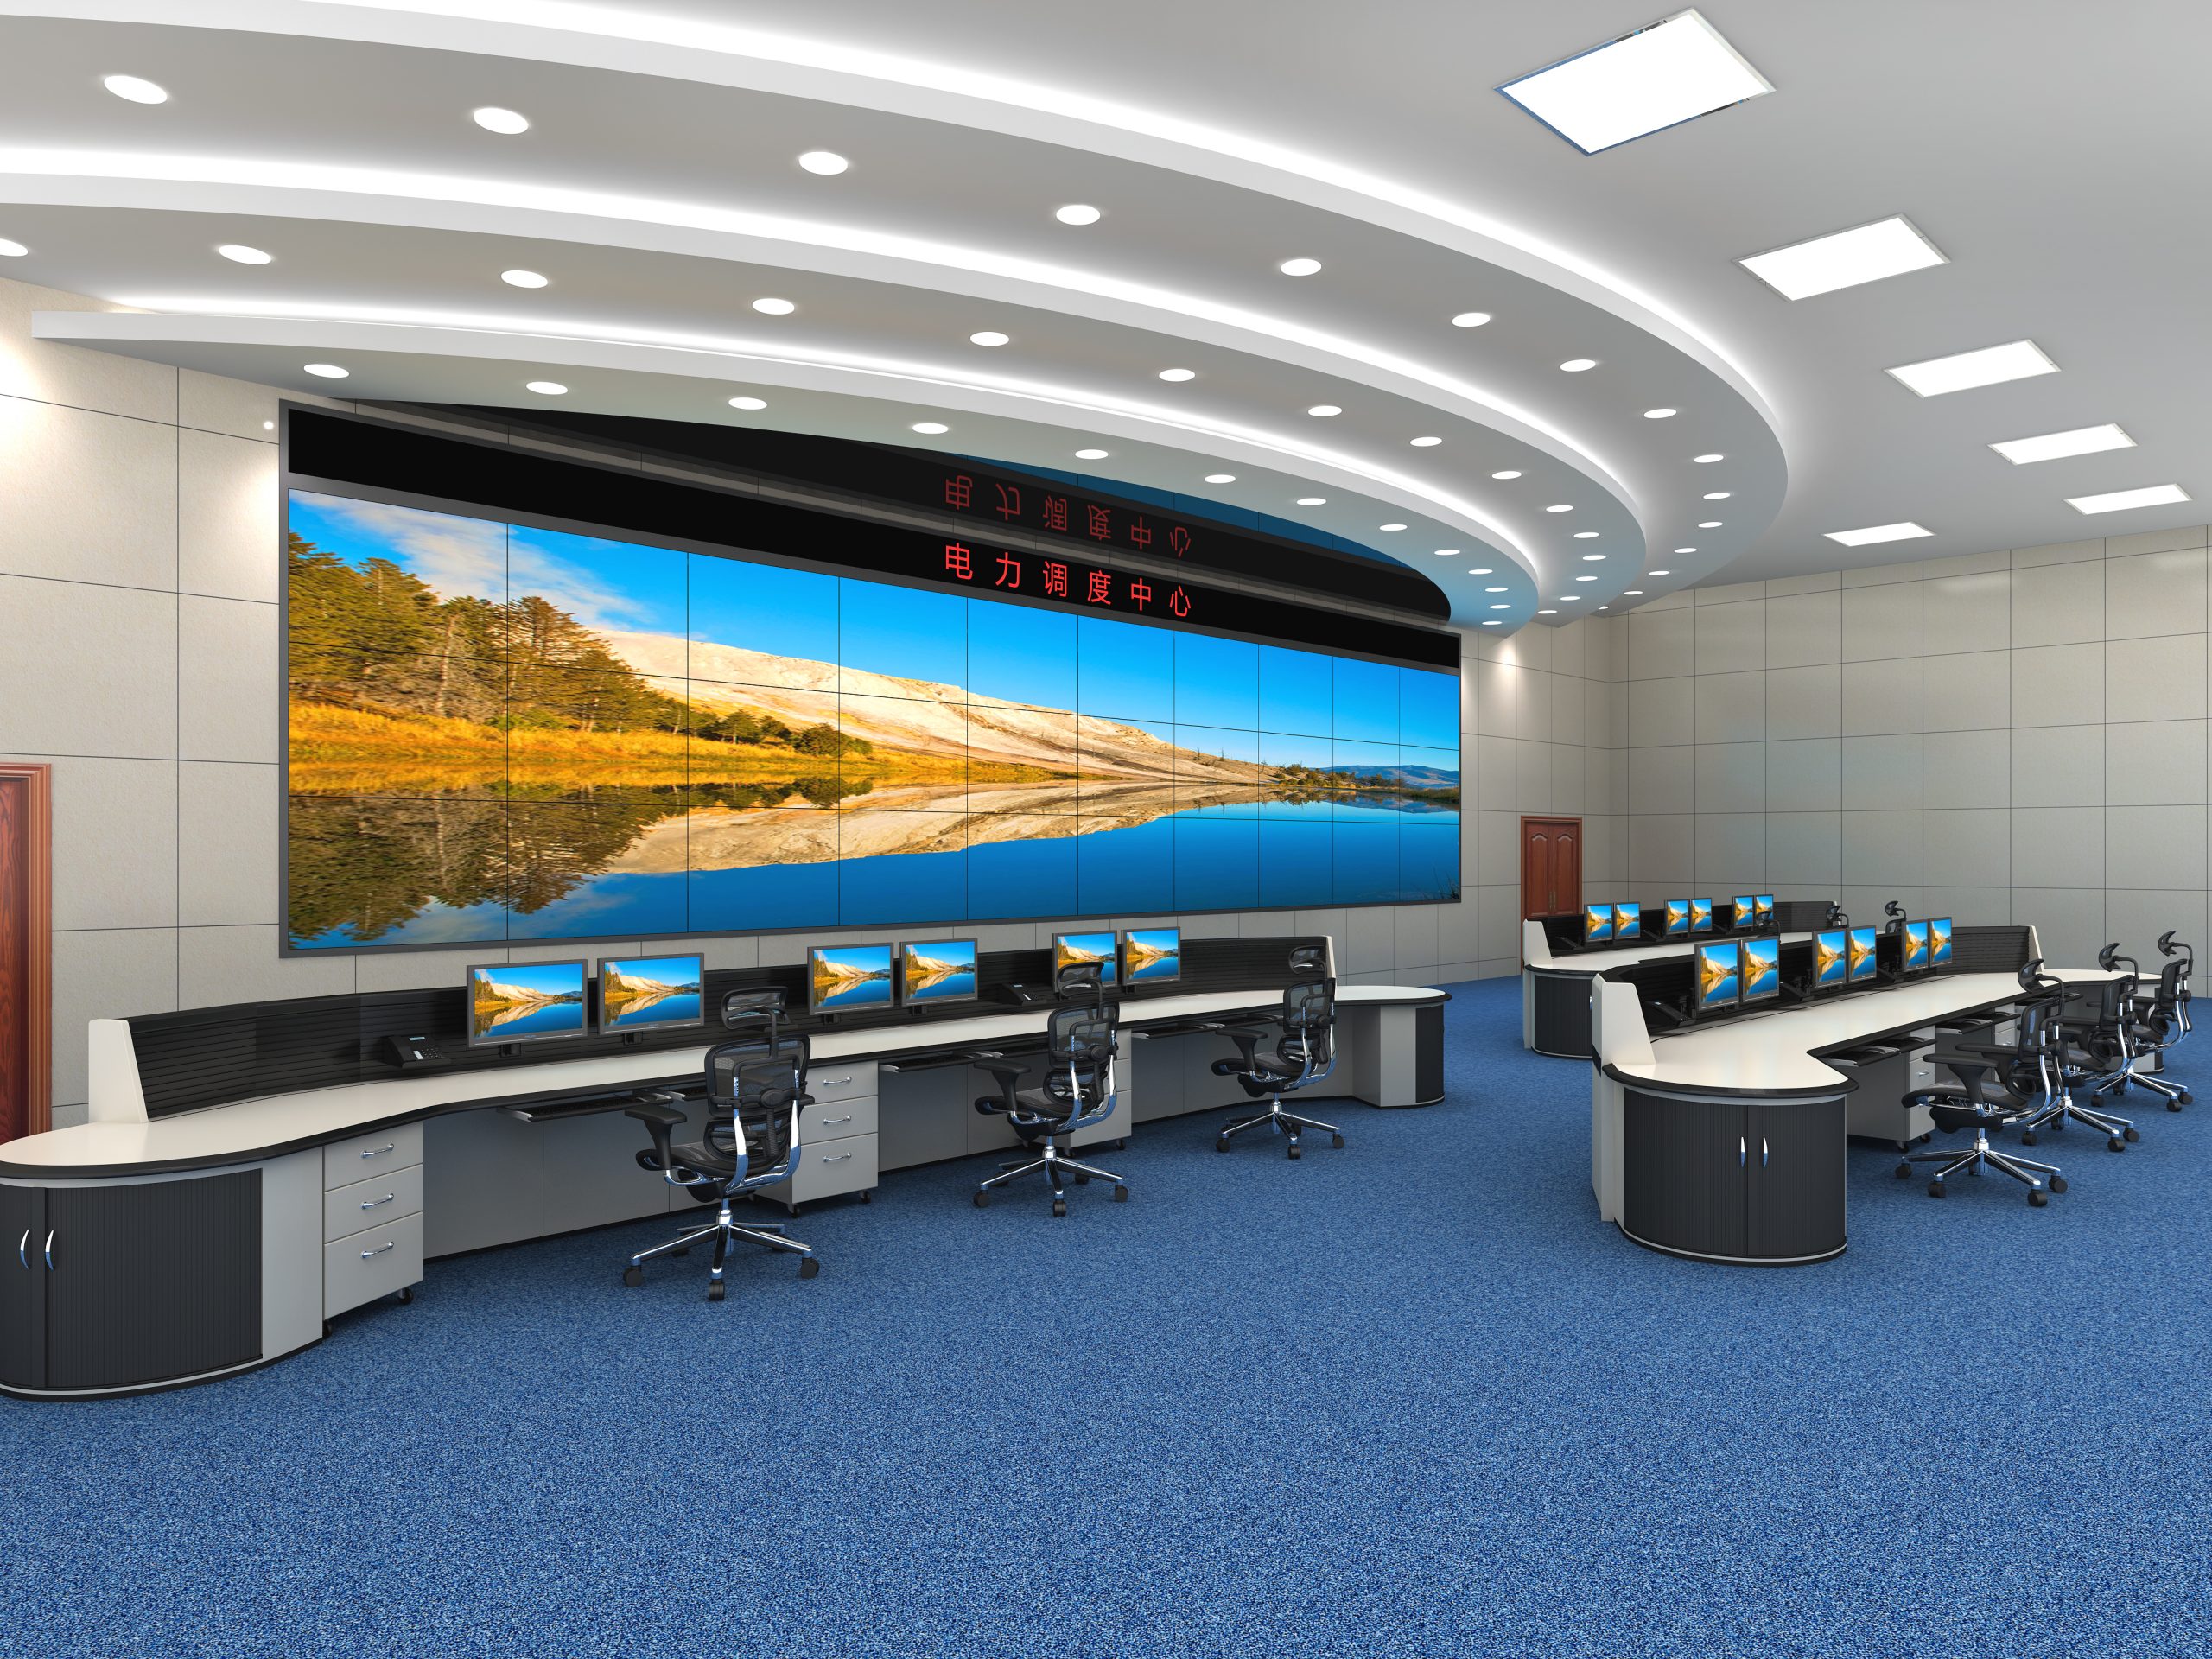 Industrial Desks and Control Room Consoles: Enhancing Productivity and Efficiency